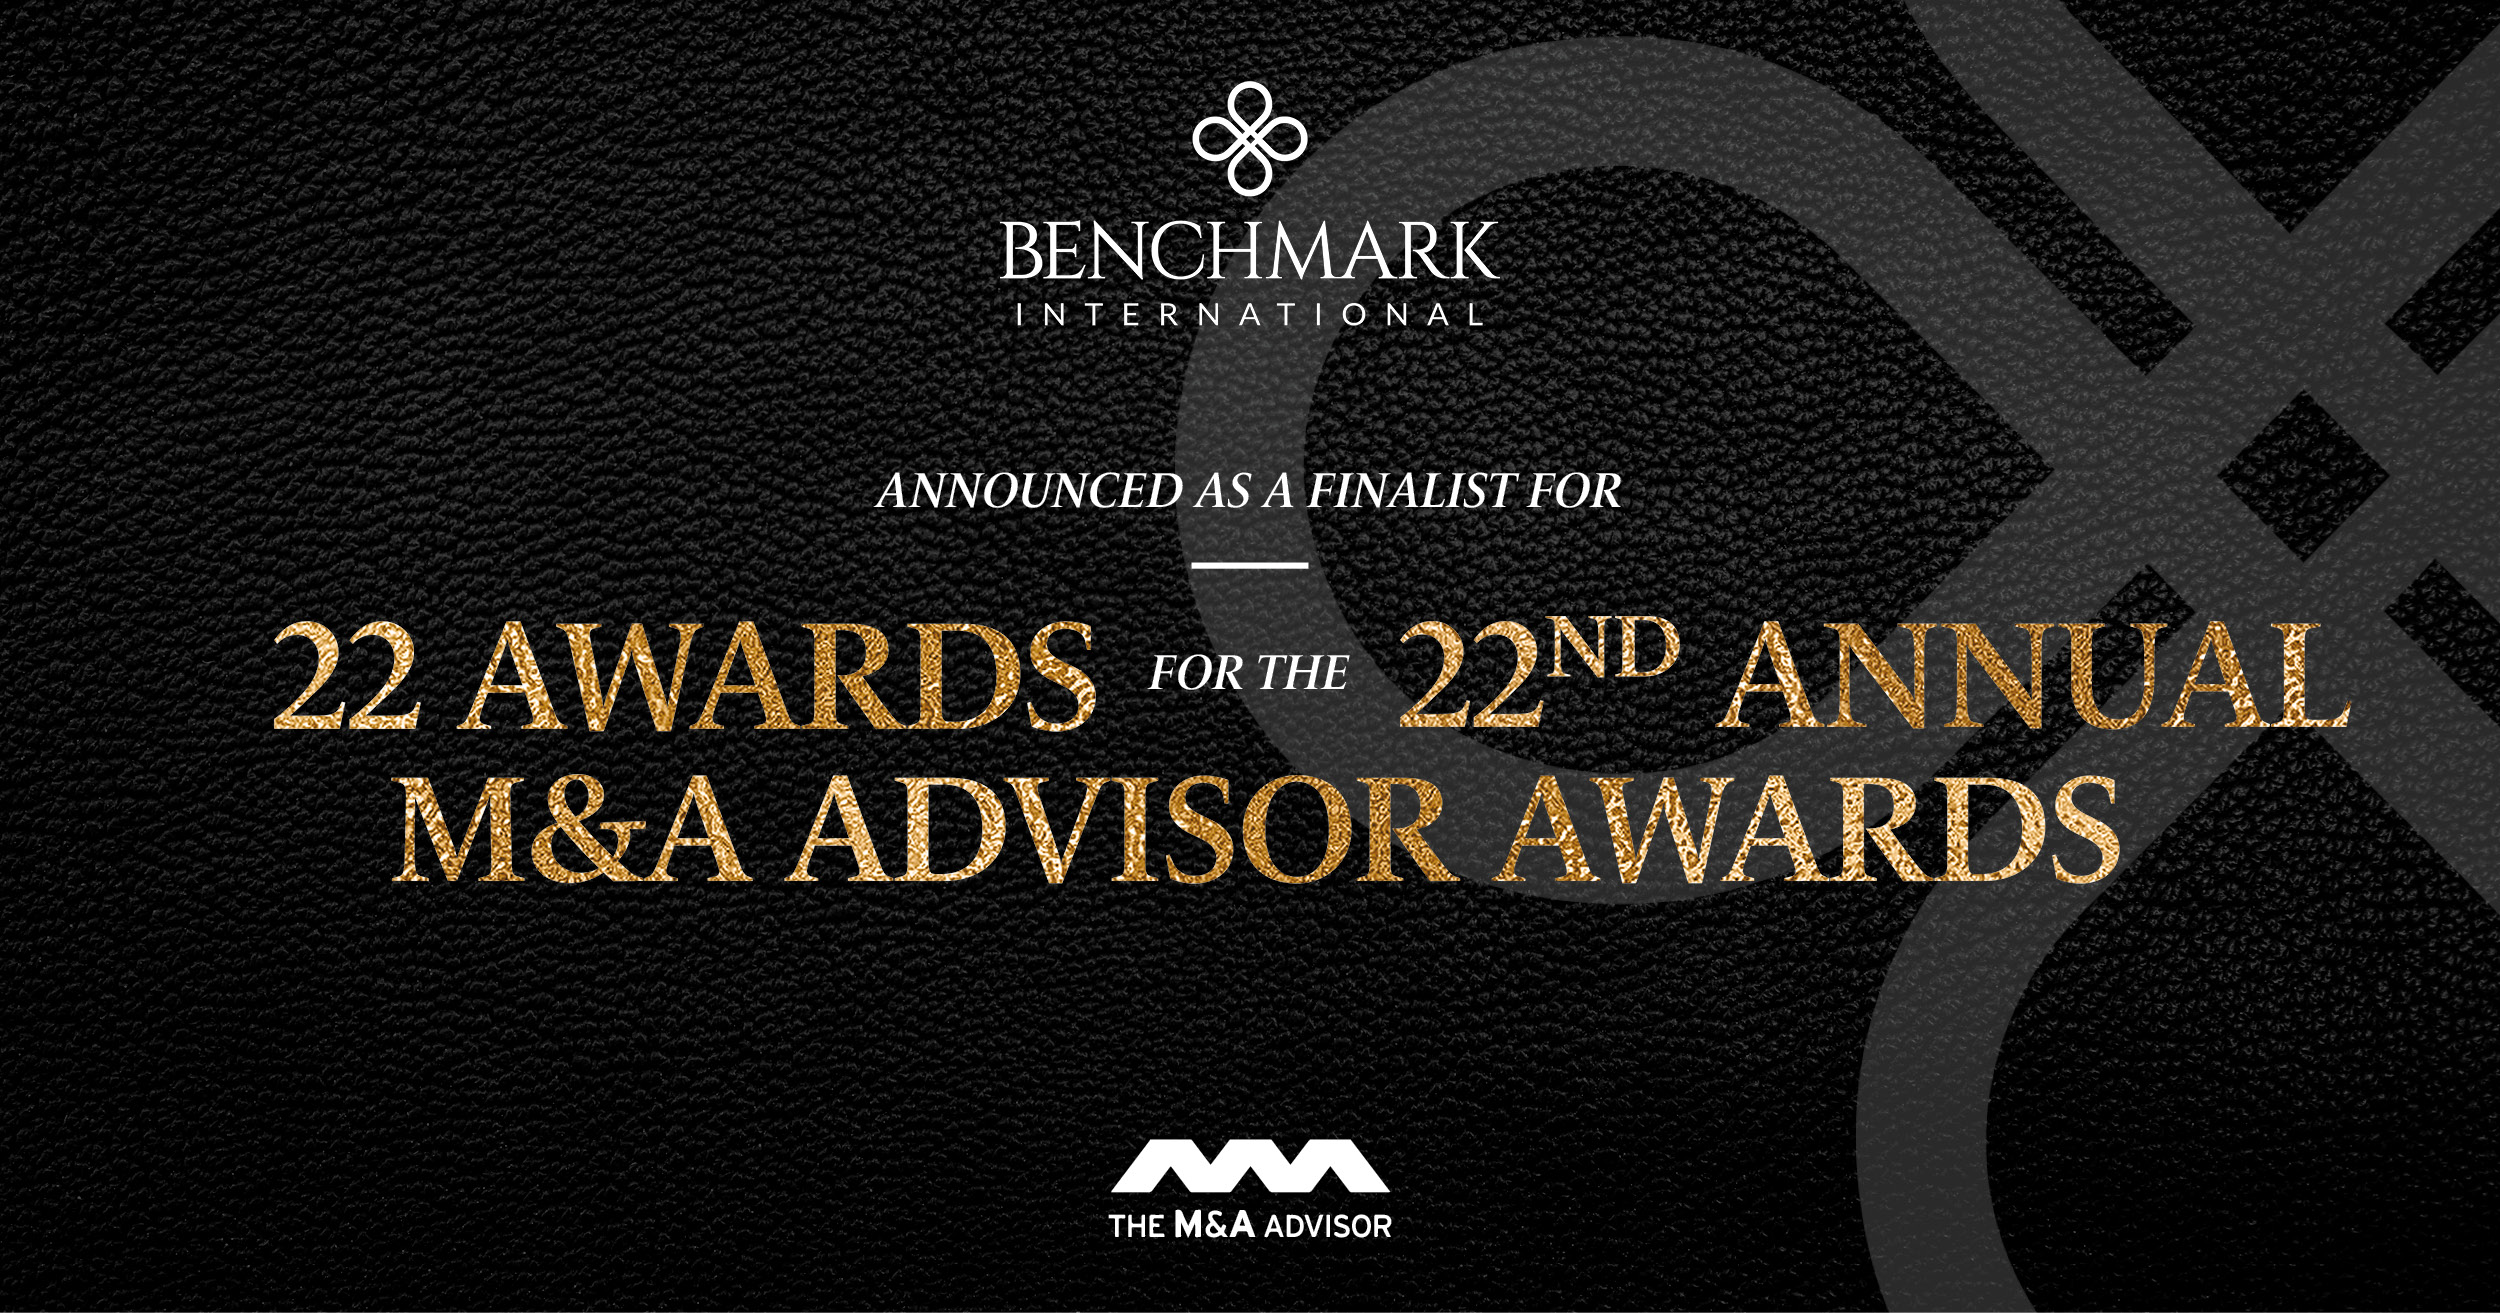 Benchmark International is a finalist for 22 awards